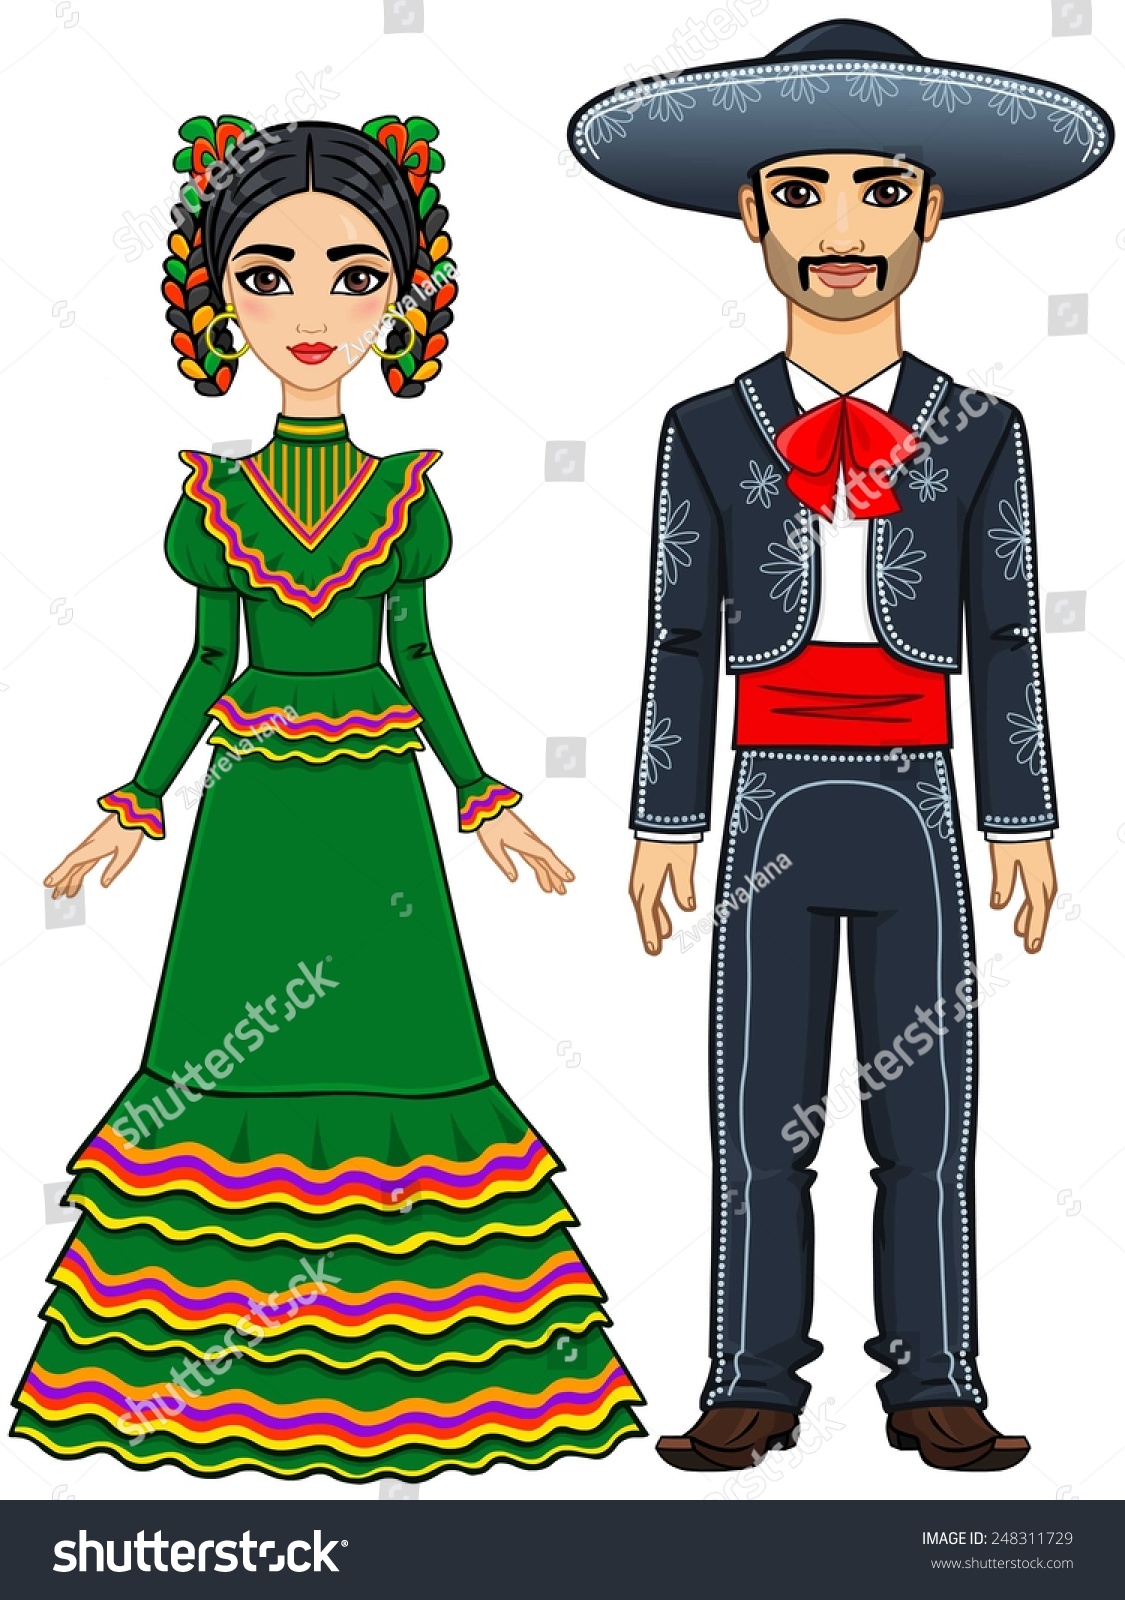 Mexican Family In Traditional Festive Clothes. Isolated On A White ...